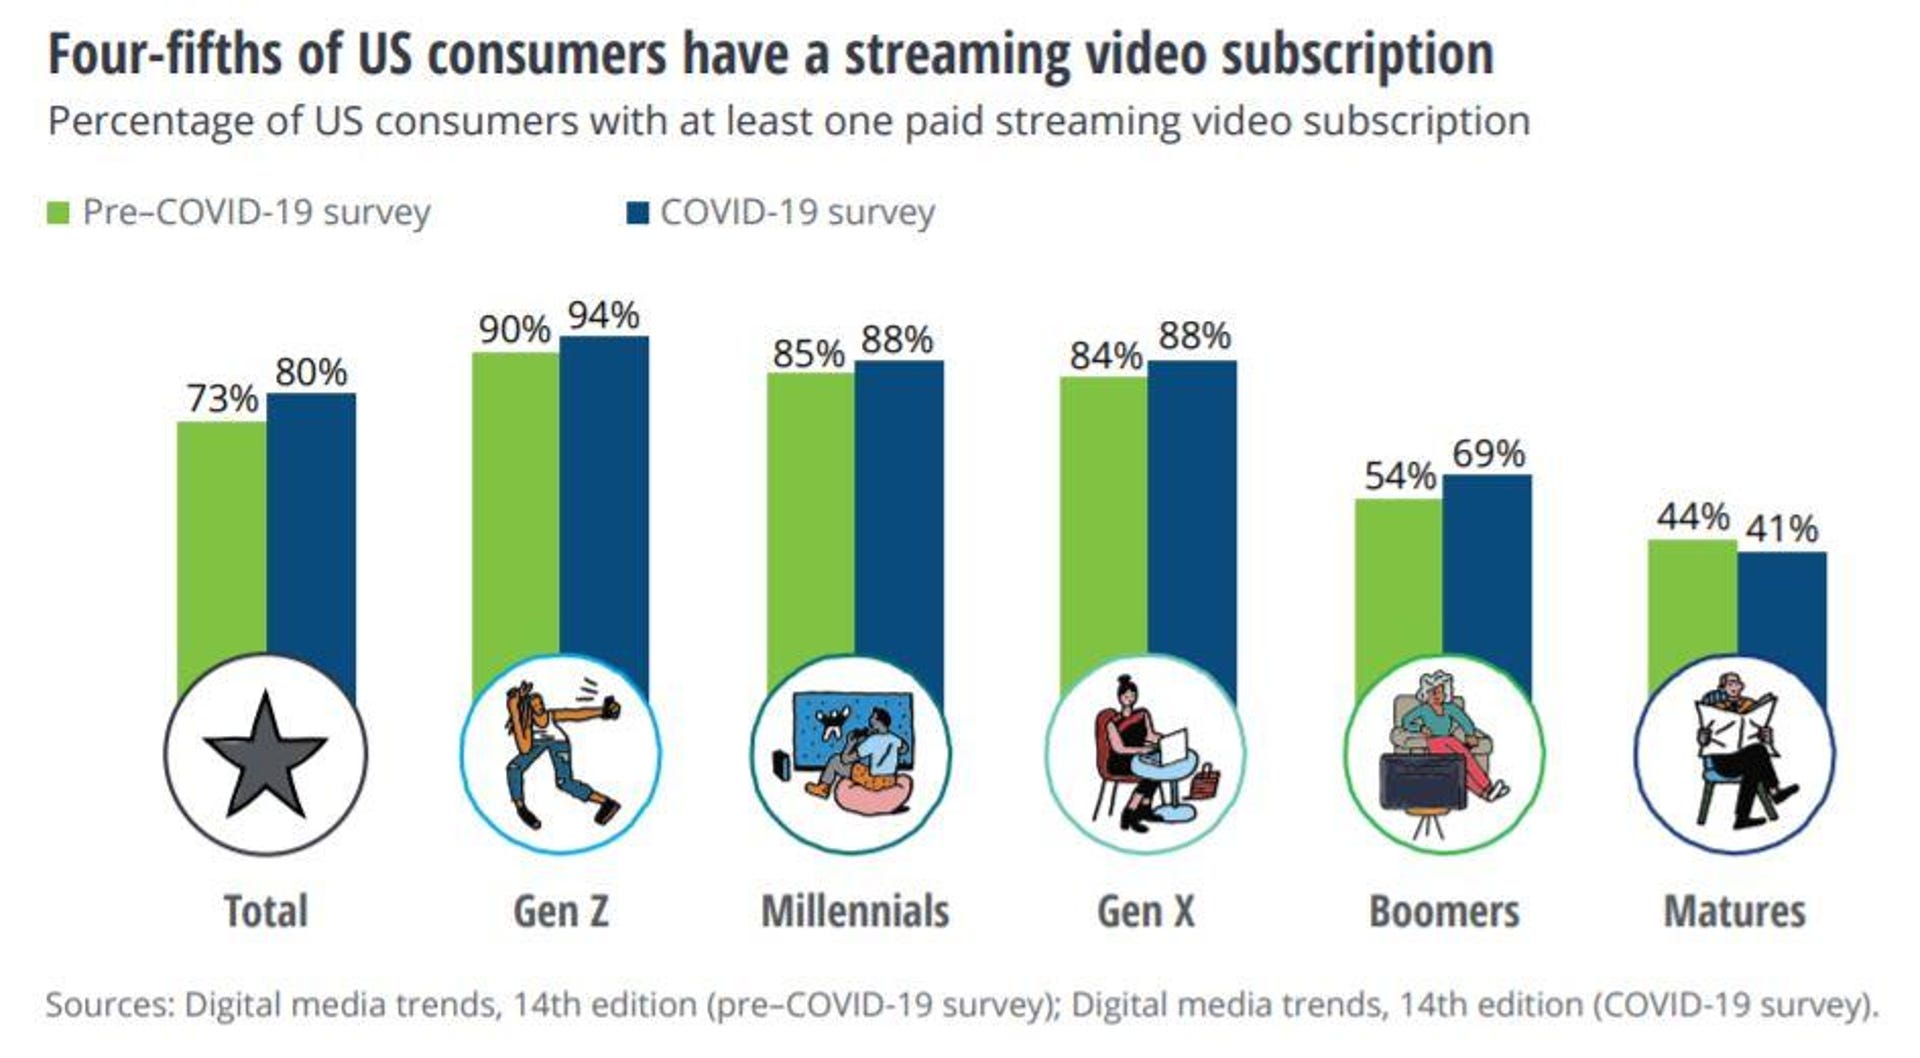 Deloitte Insights graphic showing that the percentage of people with a streaming subscription has risen across all demographics.